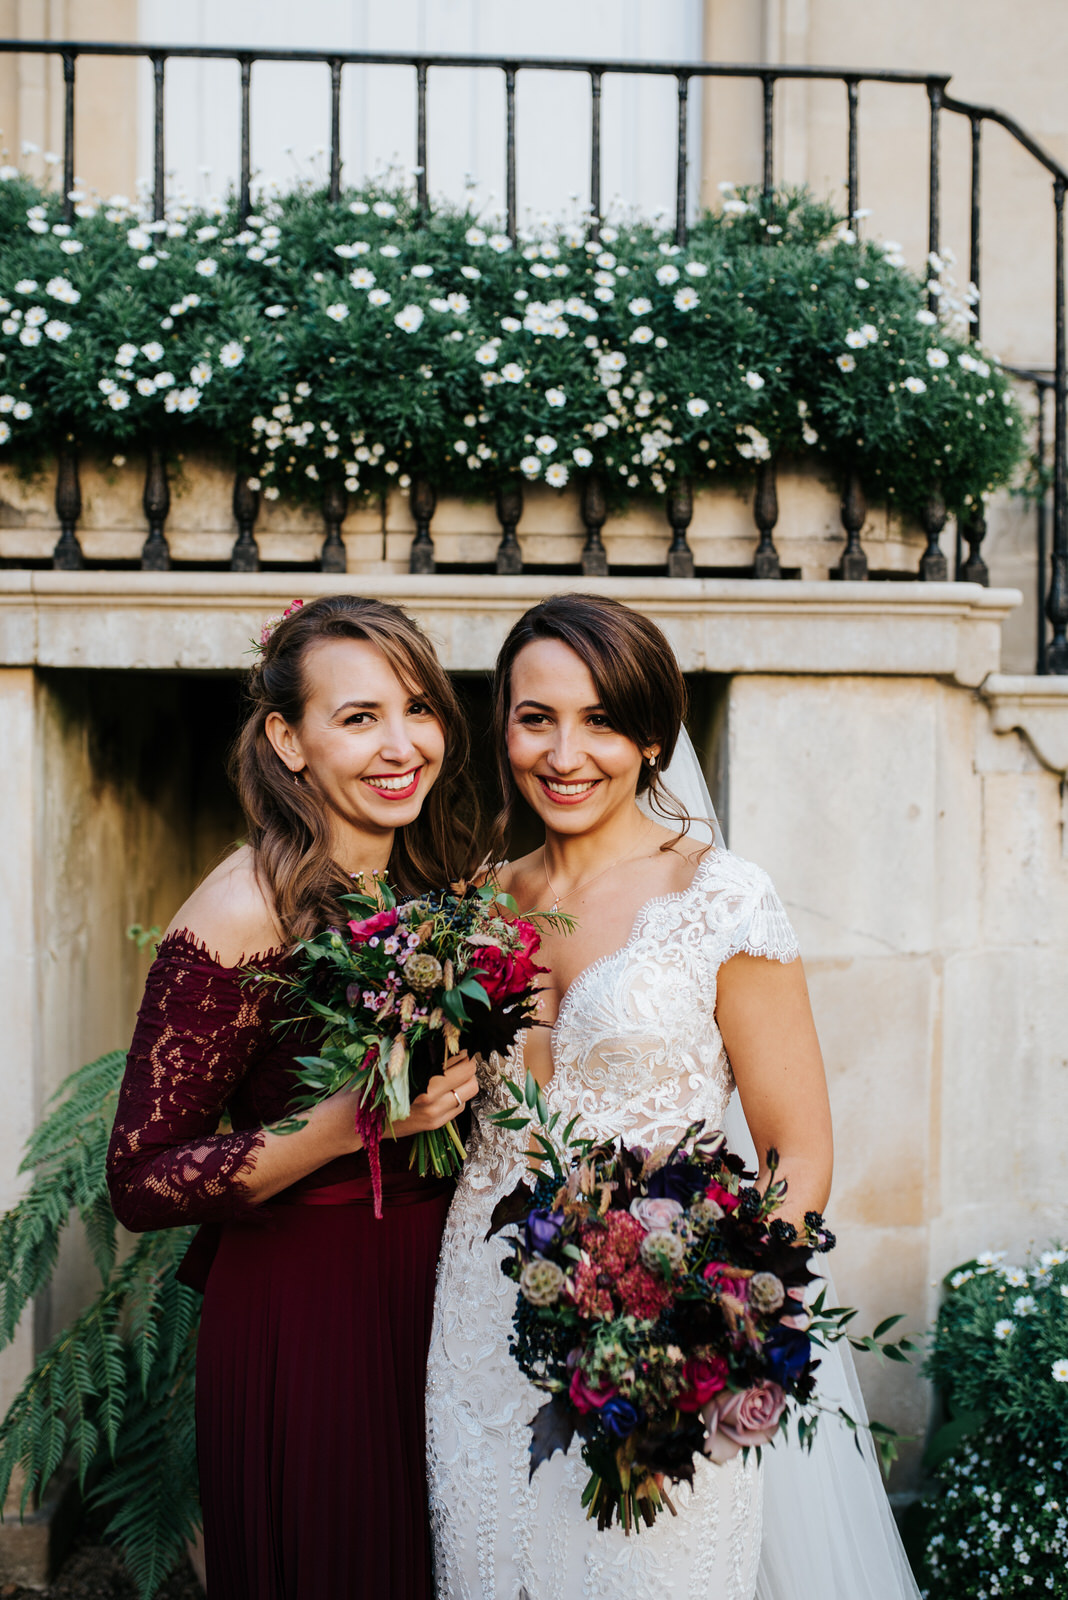 Posed photo of bride and her sister looking very natural